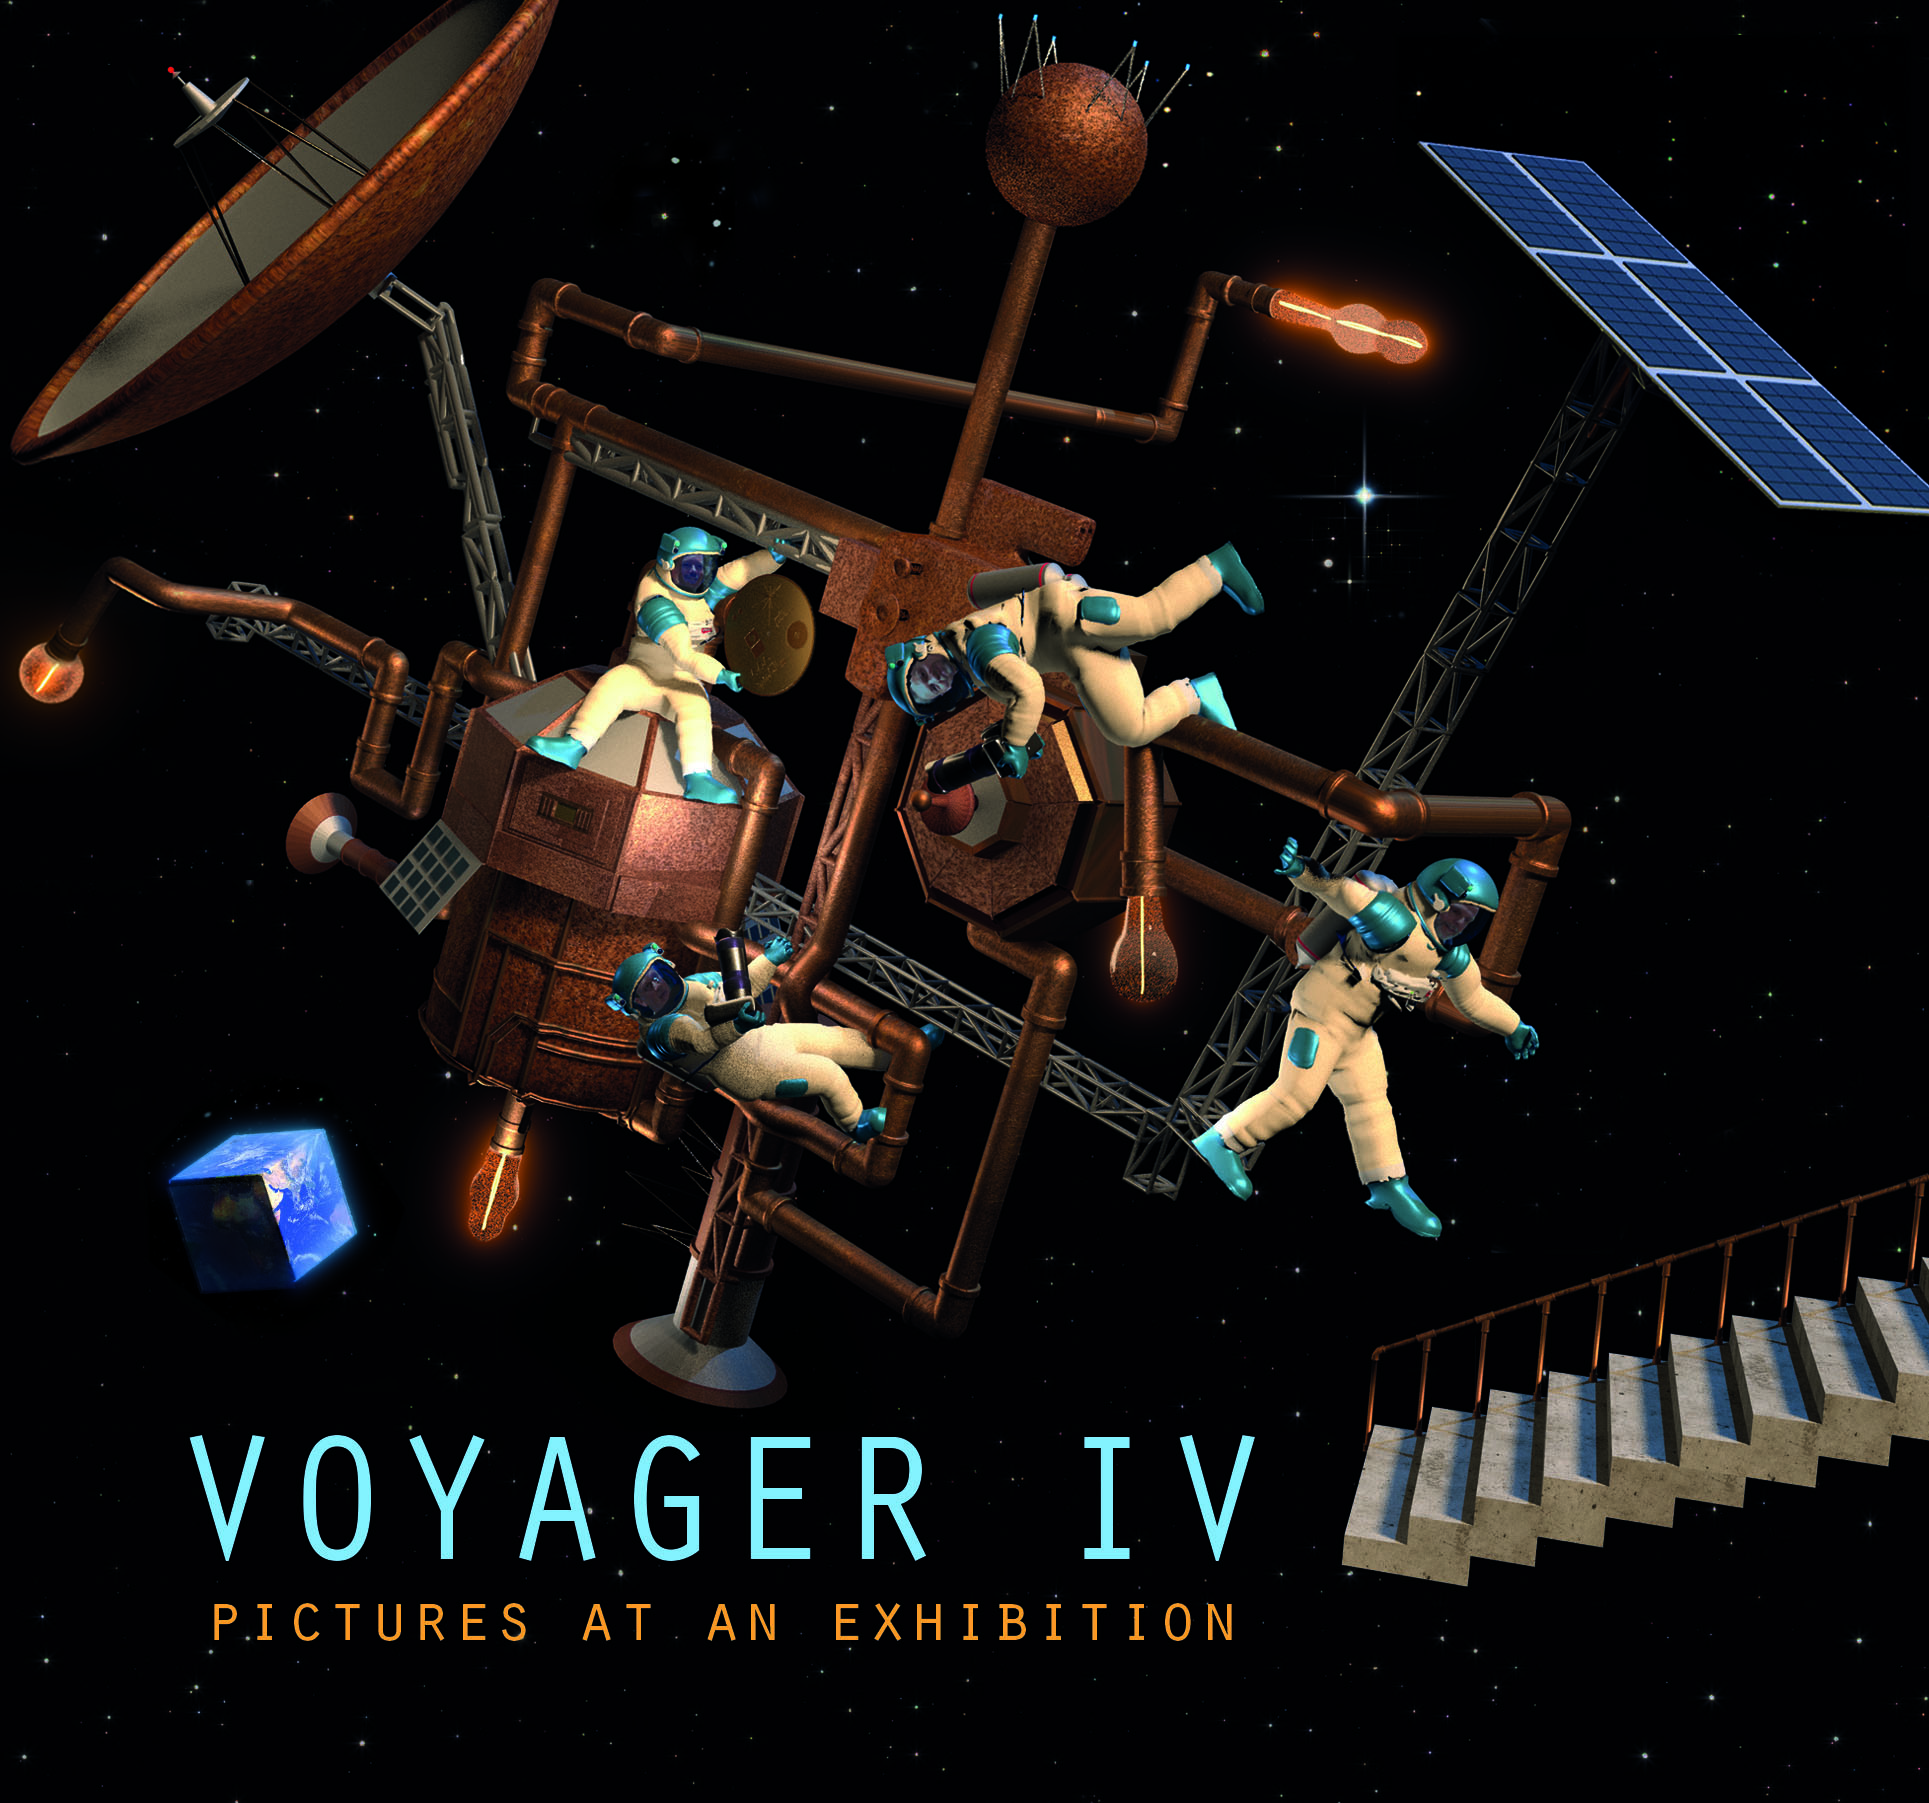 Coverfront vom Mediabook CD "Pictures At An Exhibition" von VOYAGER IV , 2019